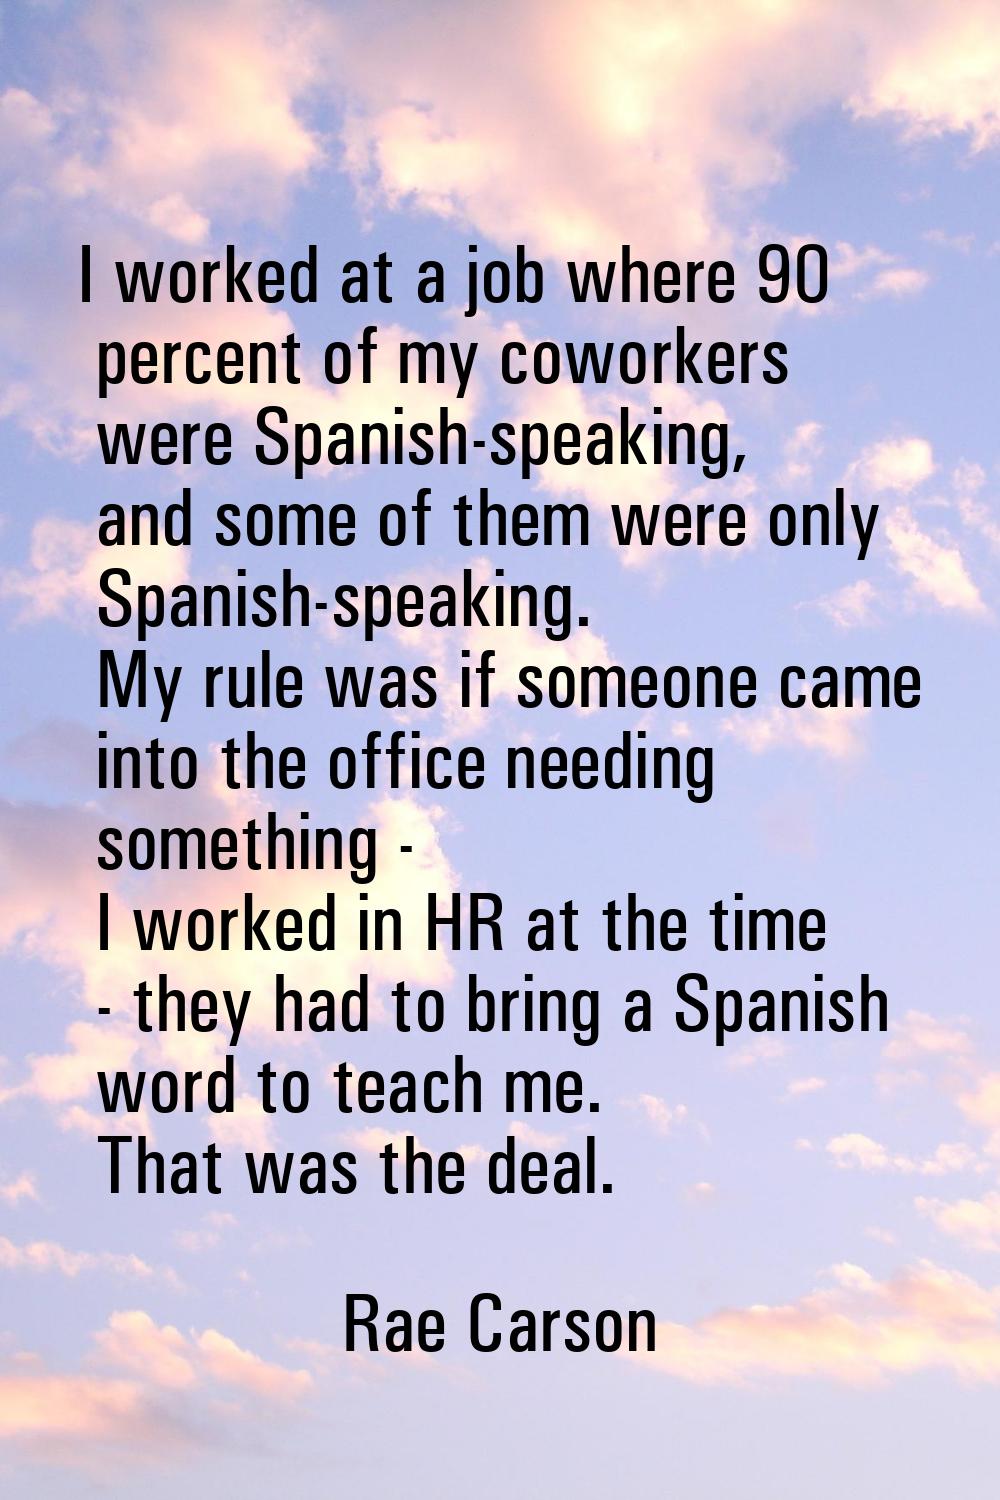 I worked at a job where 90 percent of my coworkers were Spanish-speaking, and some of them were onl